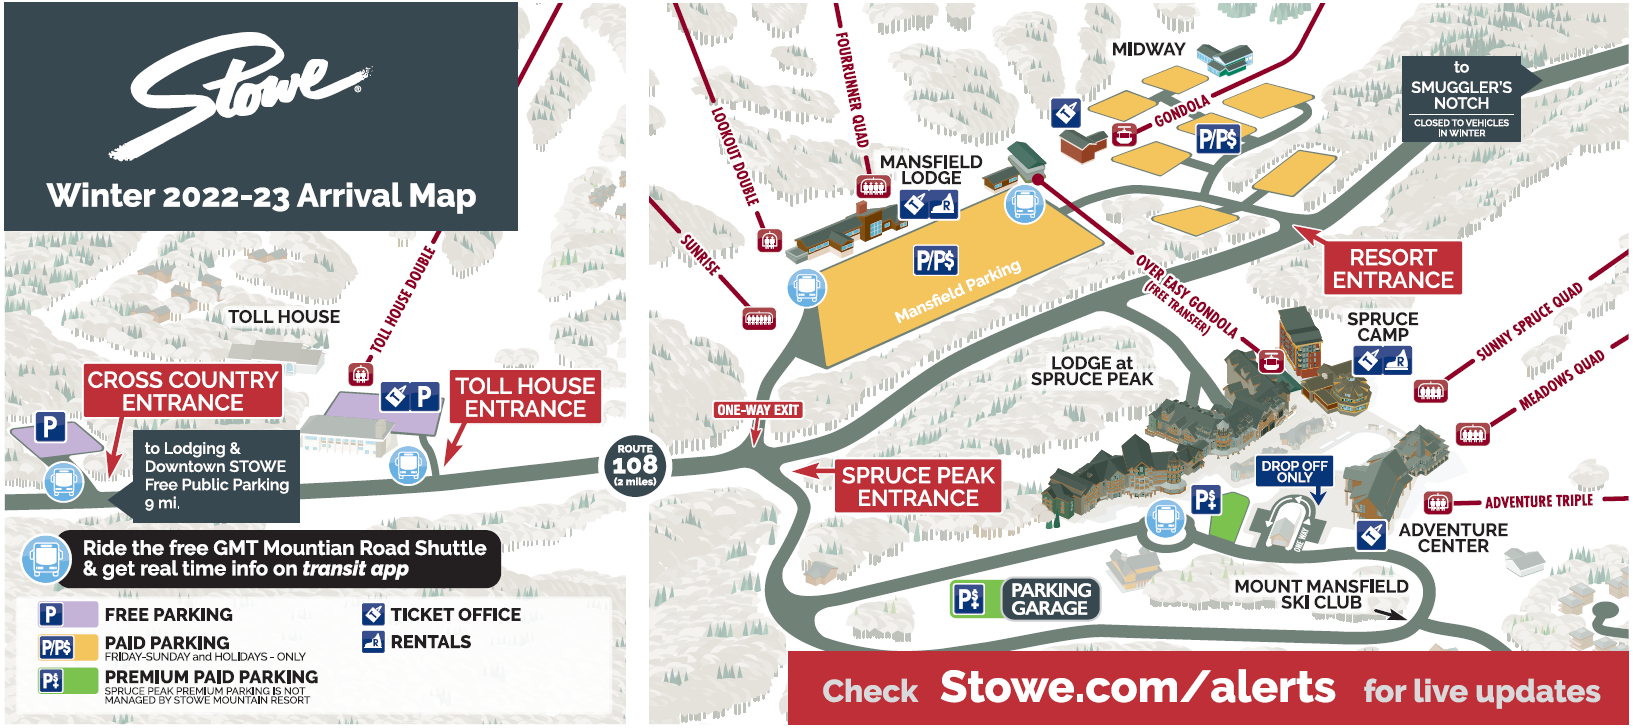 Stowe Winter 2022/2023 Base Area Map